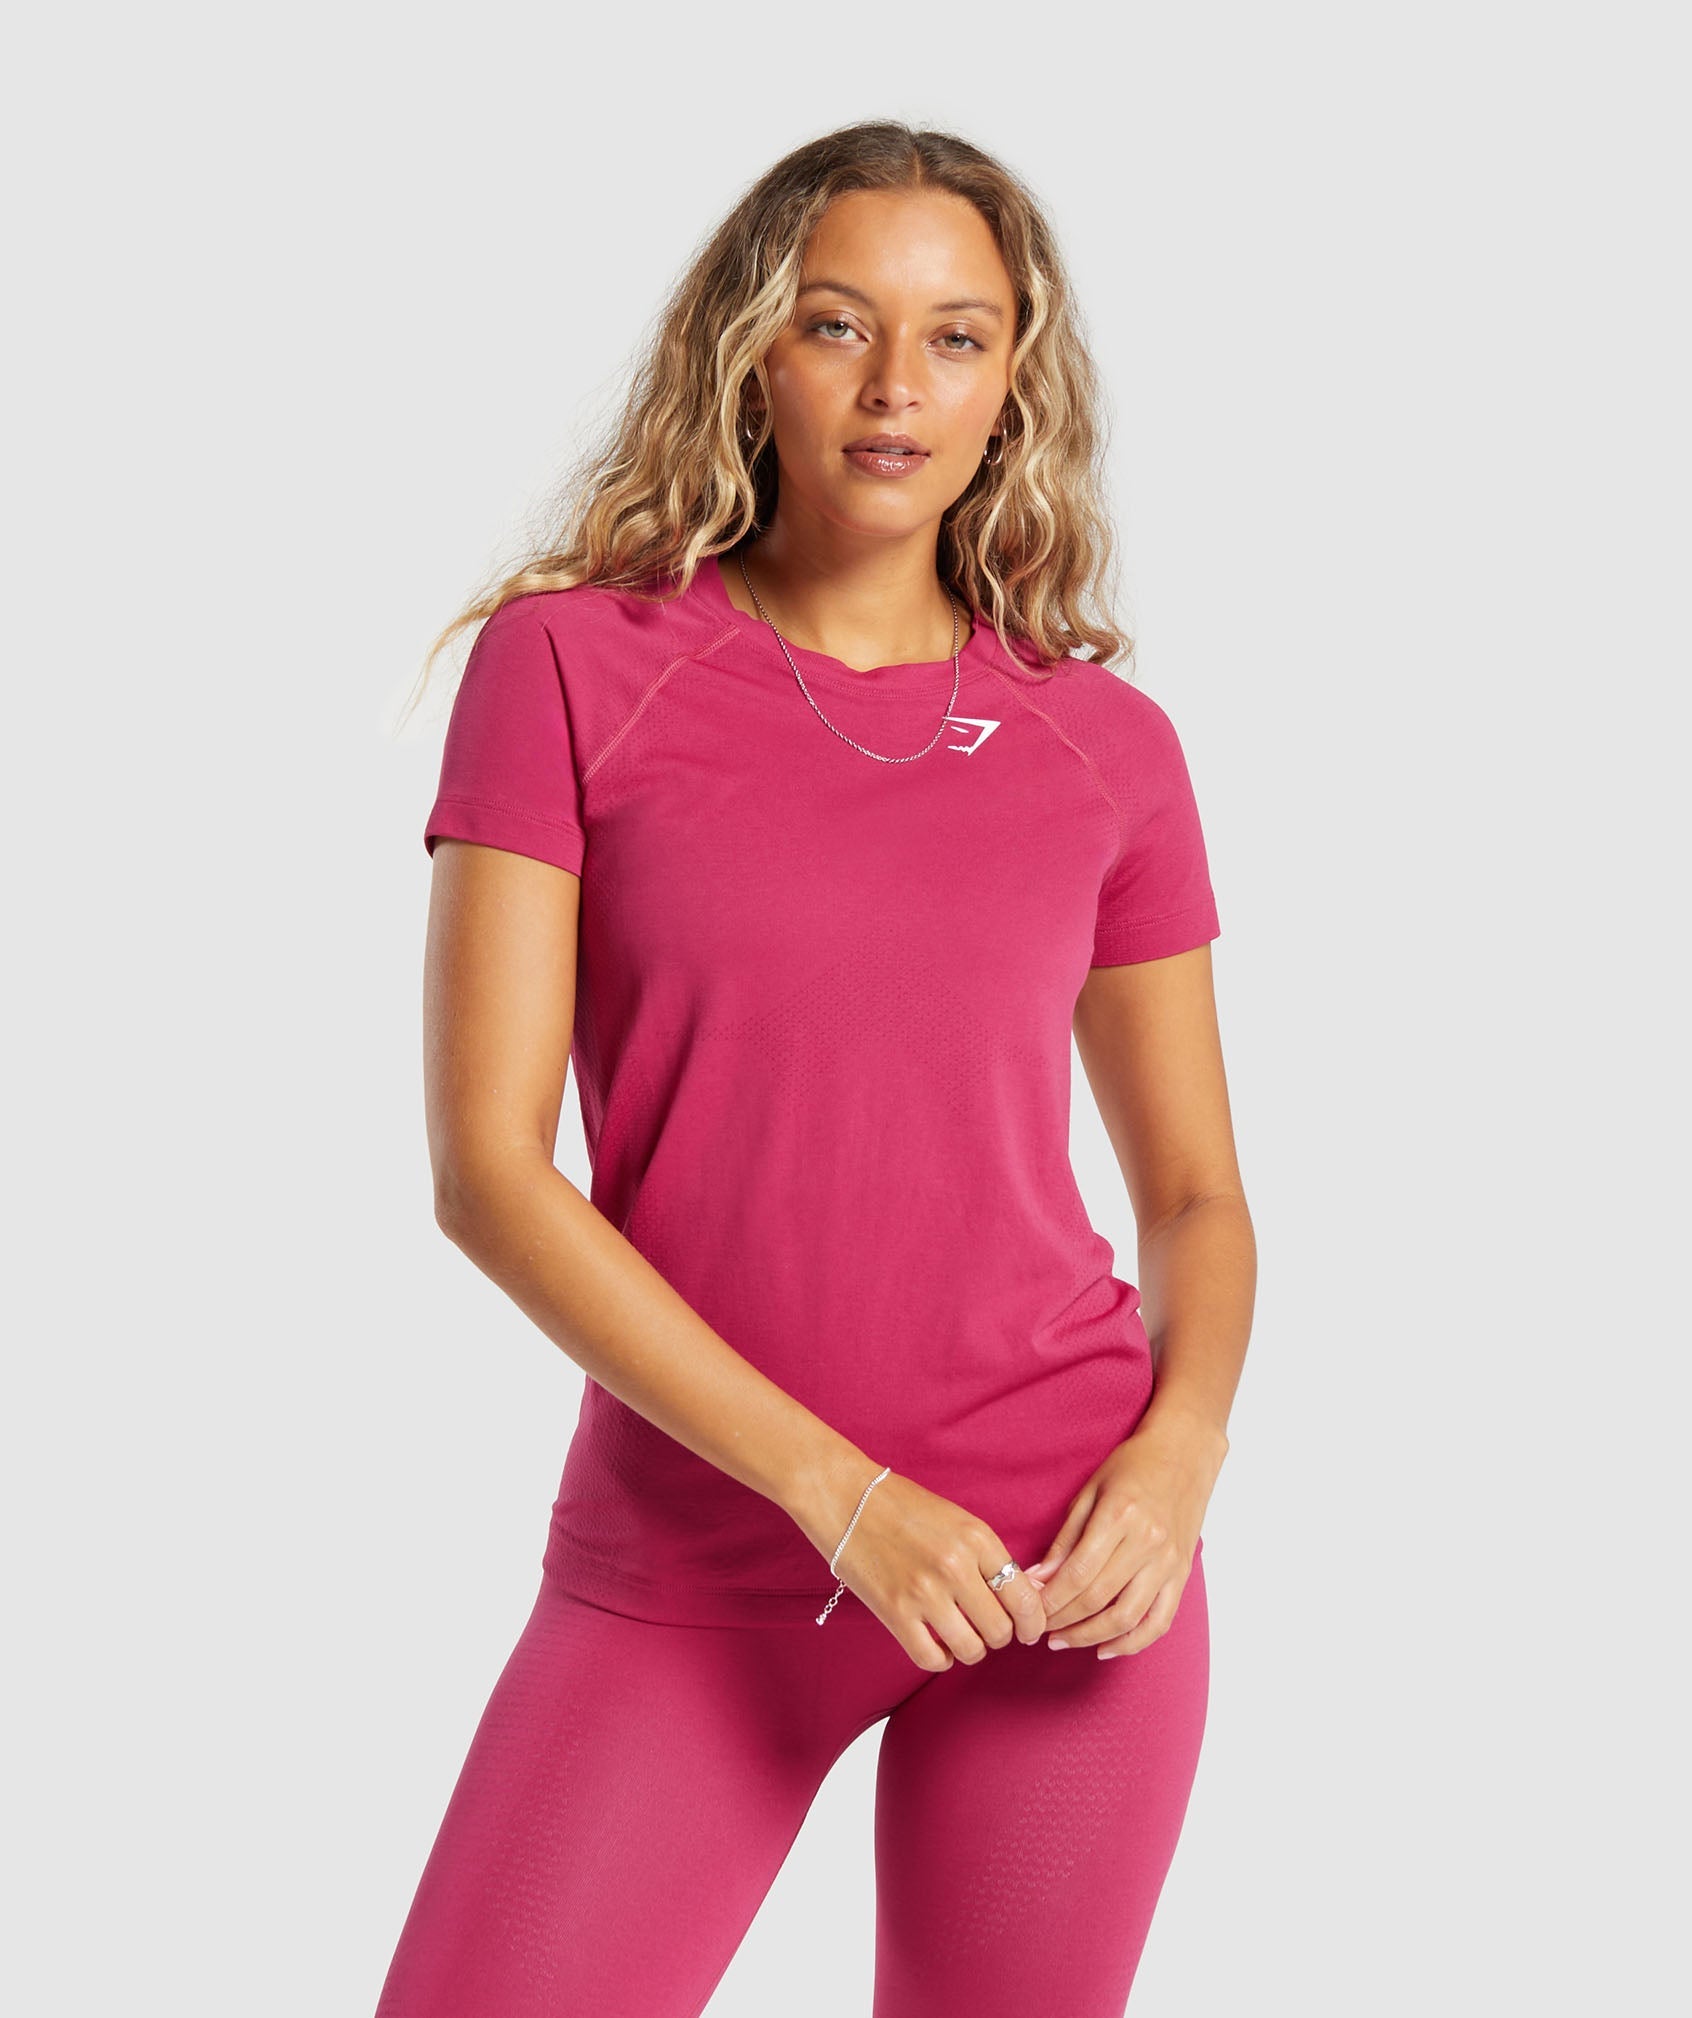 Vital Seamless  2.0 Light T Shirt in {{variantColor} is out of stock